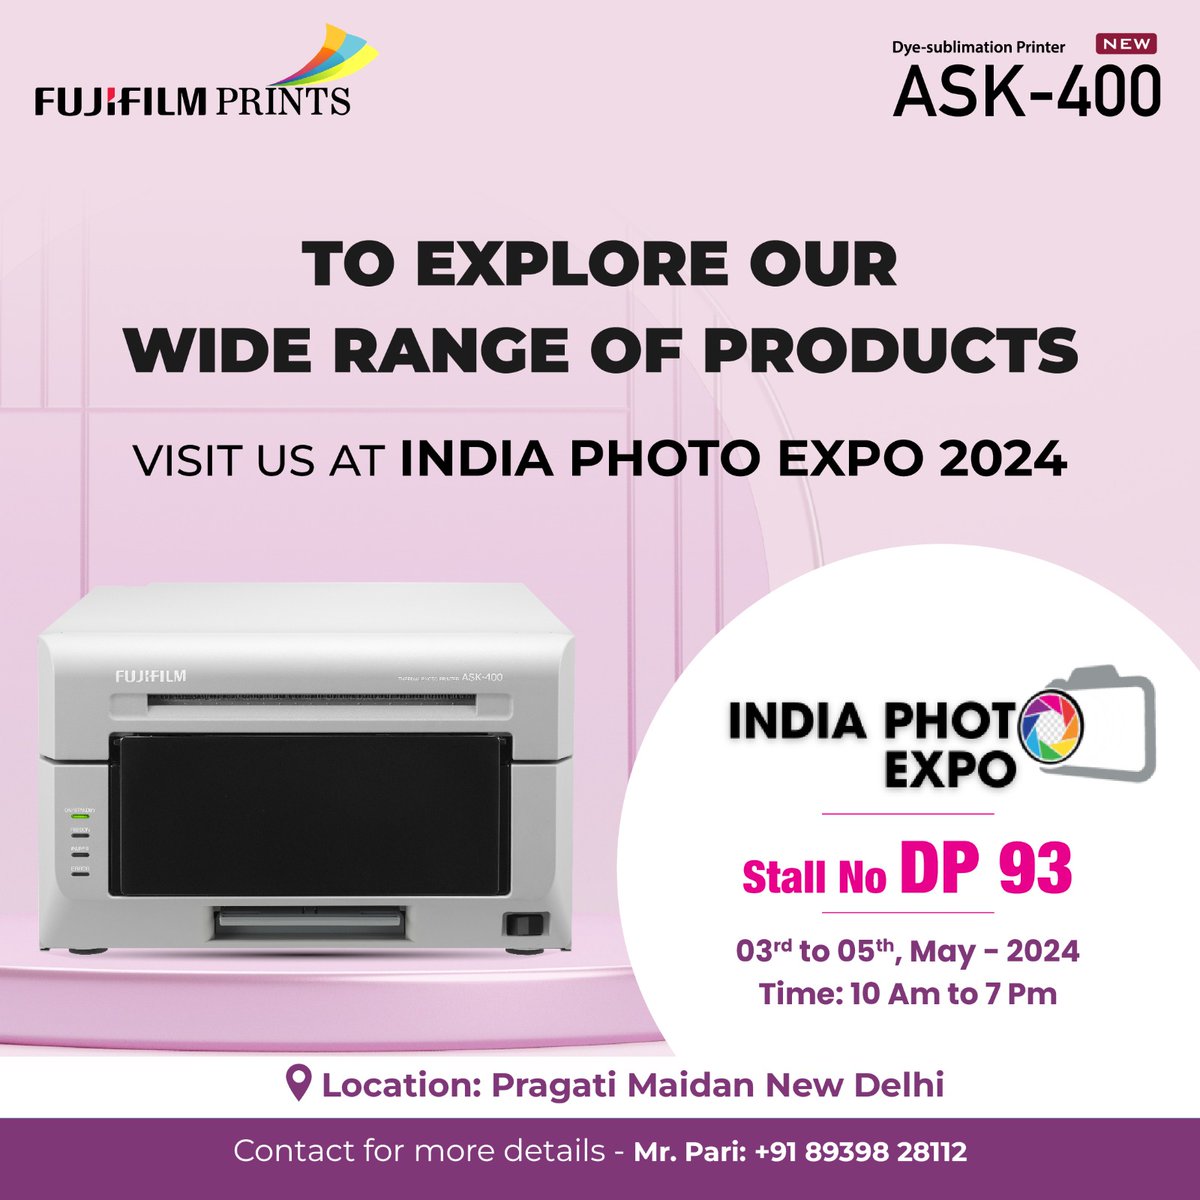 Inviting You To India Photo Expo To Explore Our Wide Range Of Products.

Dye Sublimation Printer New
ASK - 400

#fujifilm #fujifilmprints #photofinishing #photoproducts #qualityprinting #fujifilmpaper #fujifilmsystems #photography #weddingphotos #bestsolution